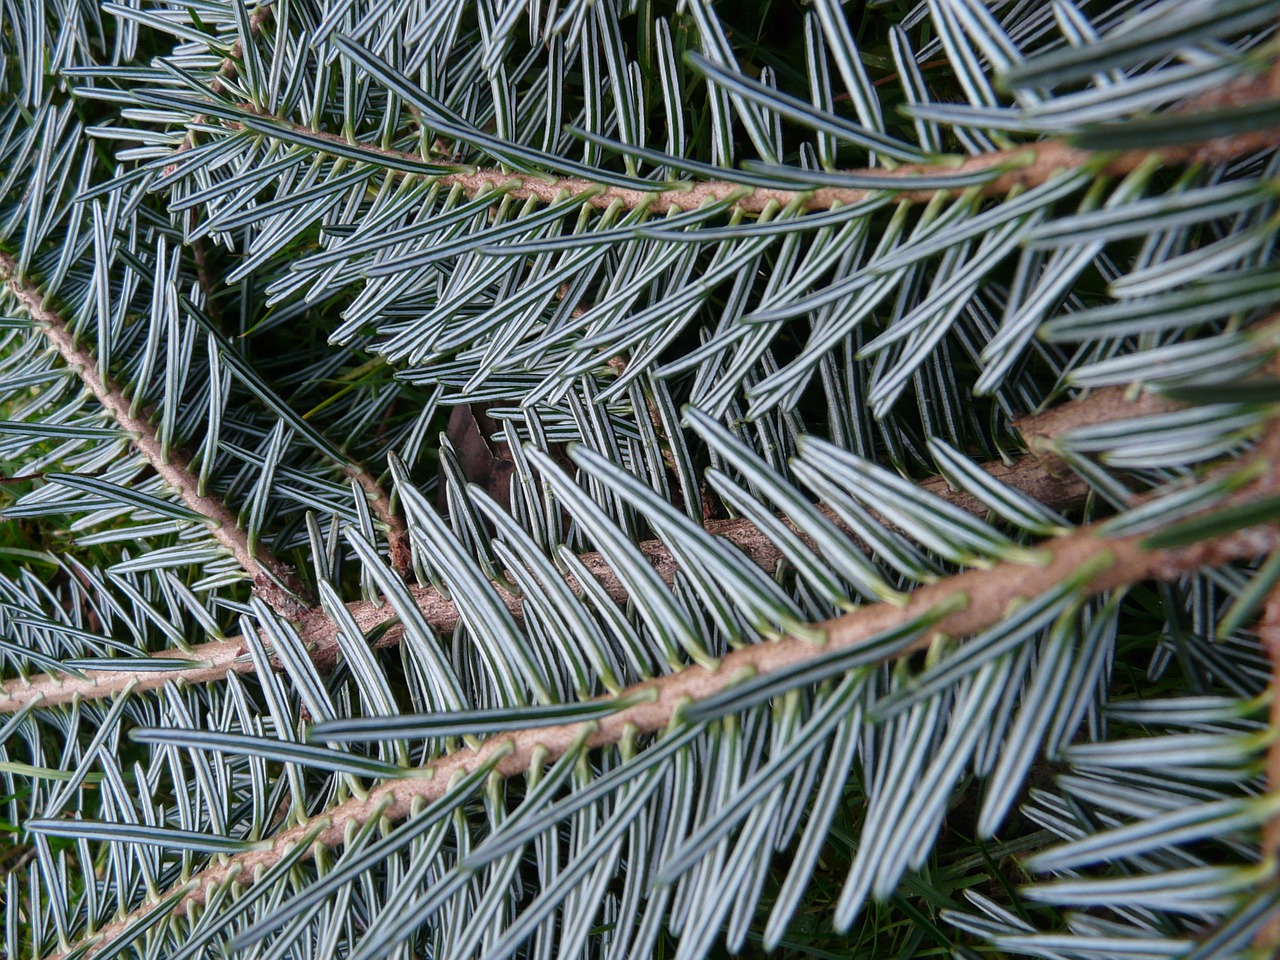 tannenzweig,pine needles,fir,silver fir,white fir,abies,alba,branch,wood,free pictures, free photos, free images, royalty free, free illustrations, public domain